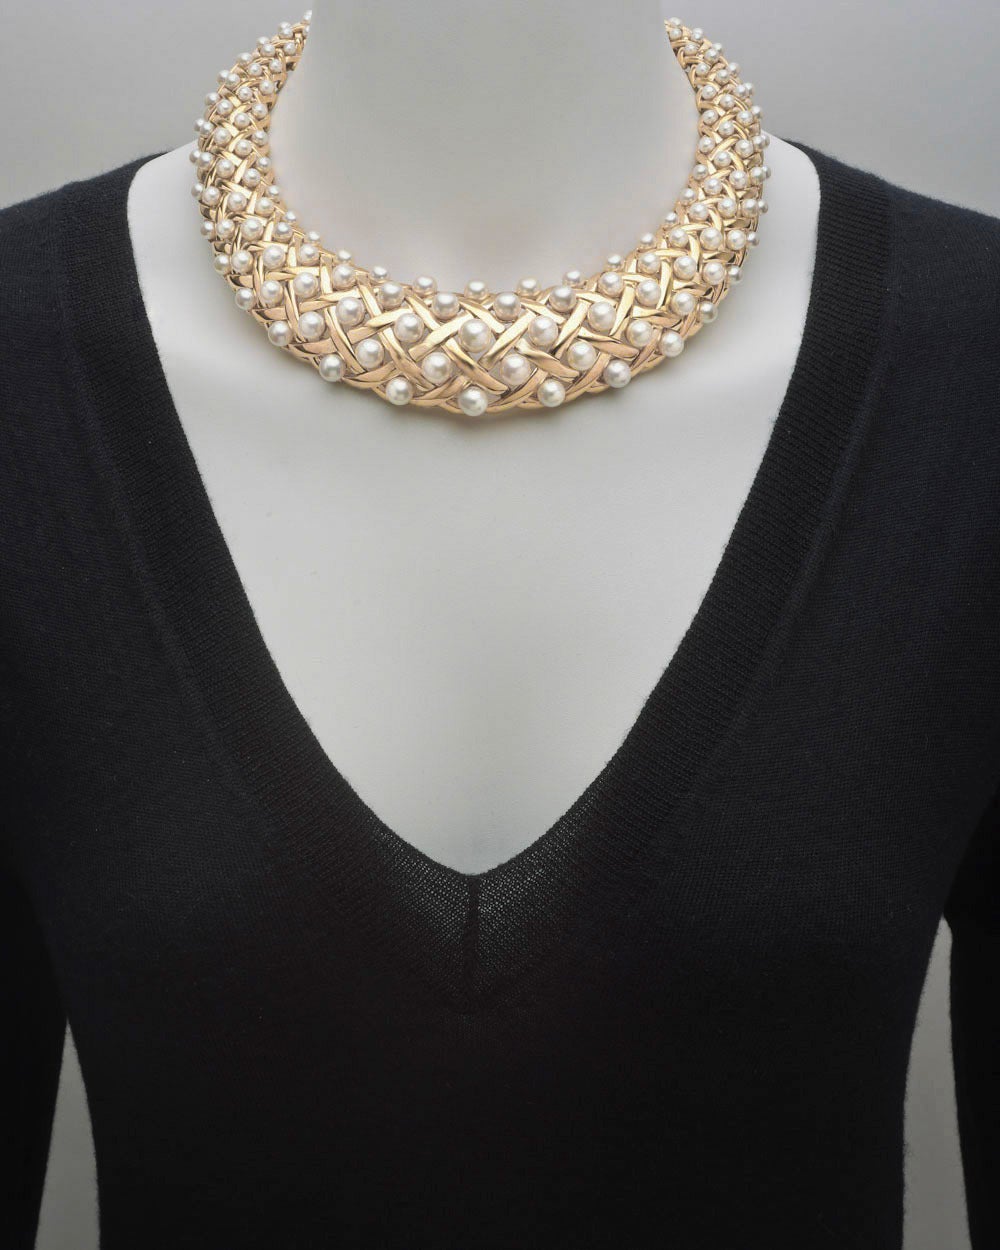 Graduated pearl and woven gold choker necklace, mounted in 18k yellow gold, numbered 5A7, signed Chanel.